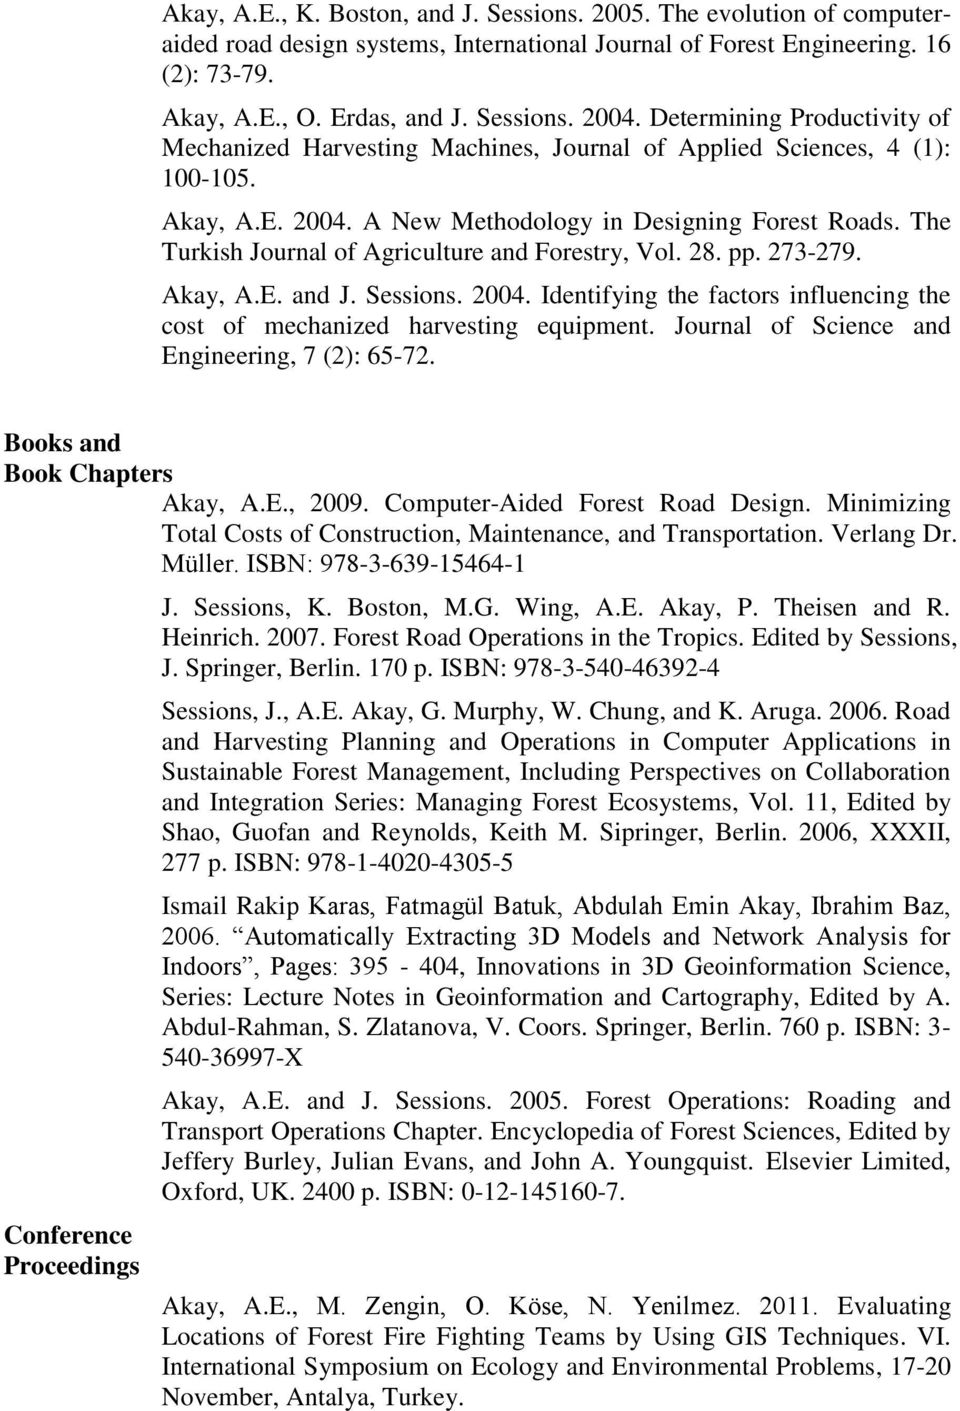 The Turkish Journal of Agriculture and Forestry, Vol. 28. pp. 273-279. Akay, A.E. and J. Sessions. 2004. Identifying the factors influencing the cost of mechanized harvesting equipment.